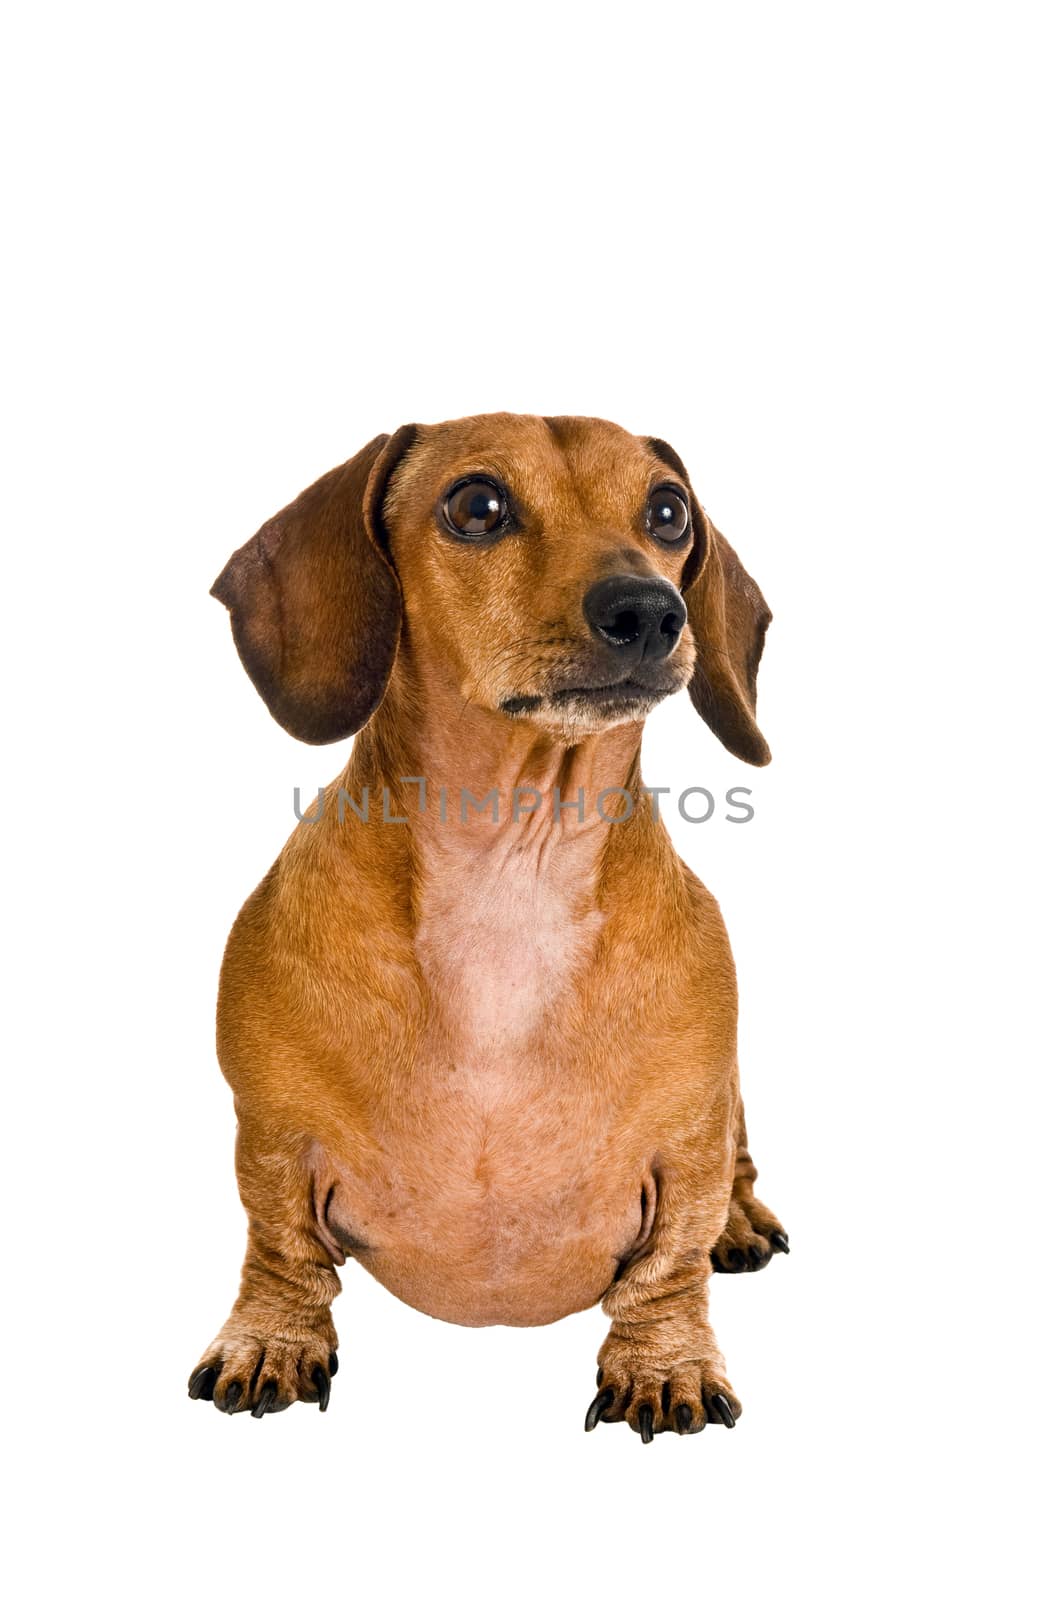 Silly Little Dachshund On White Background by stockbuster1